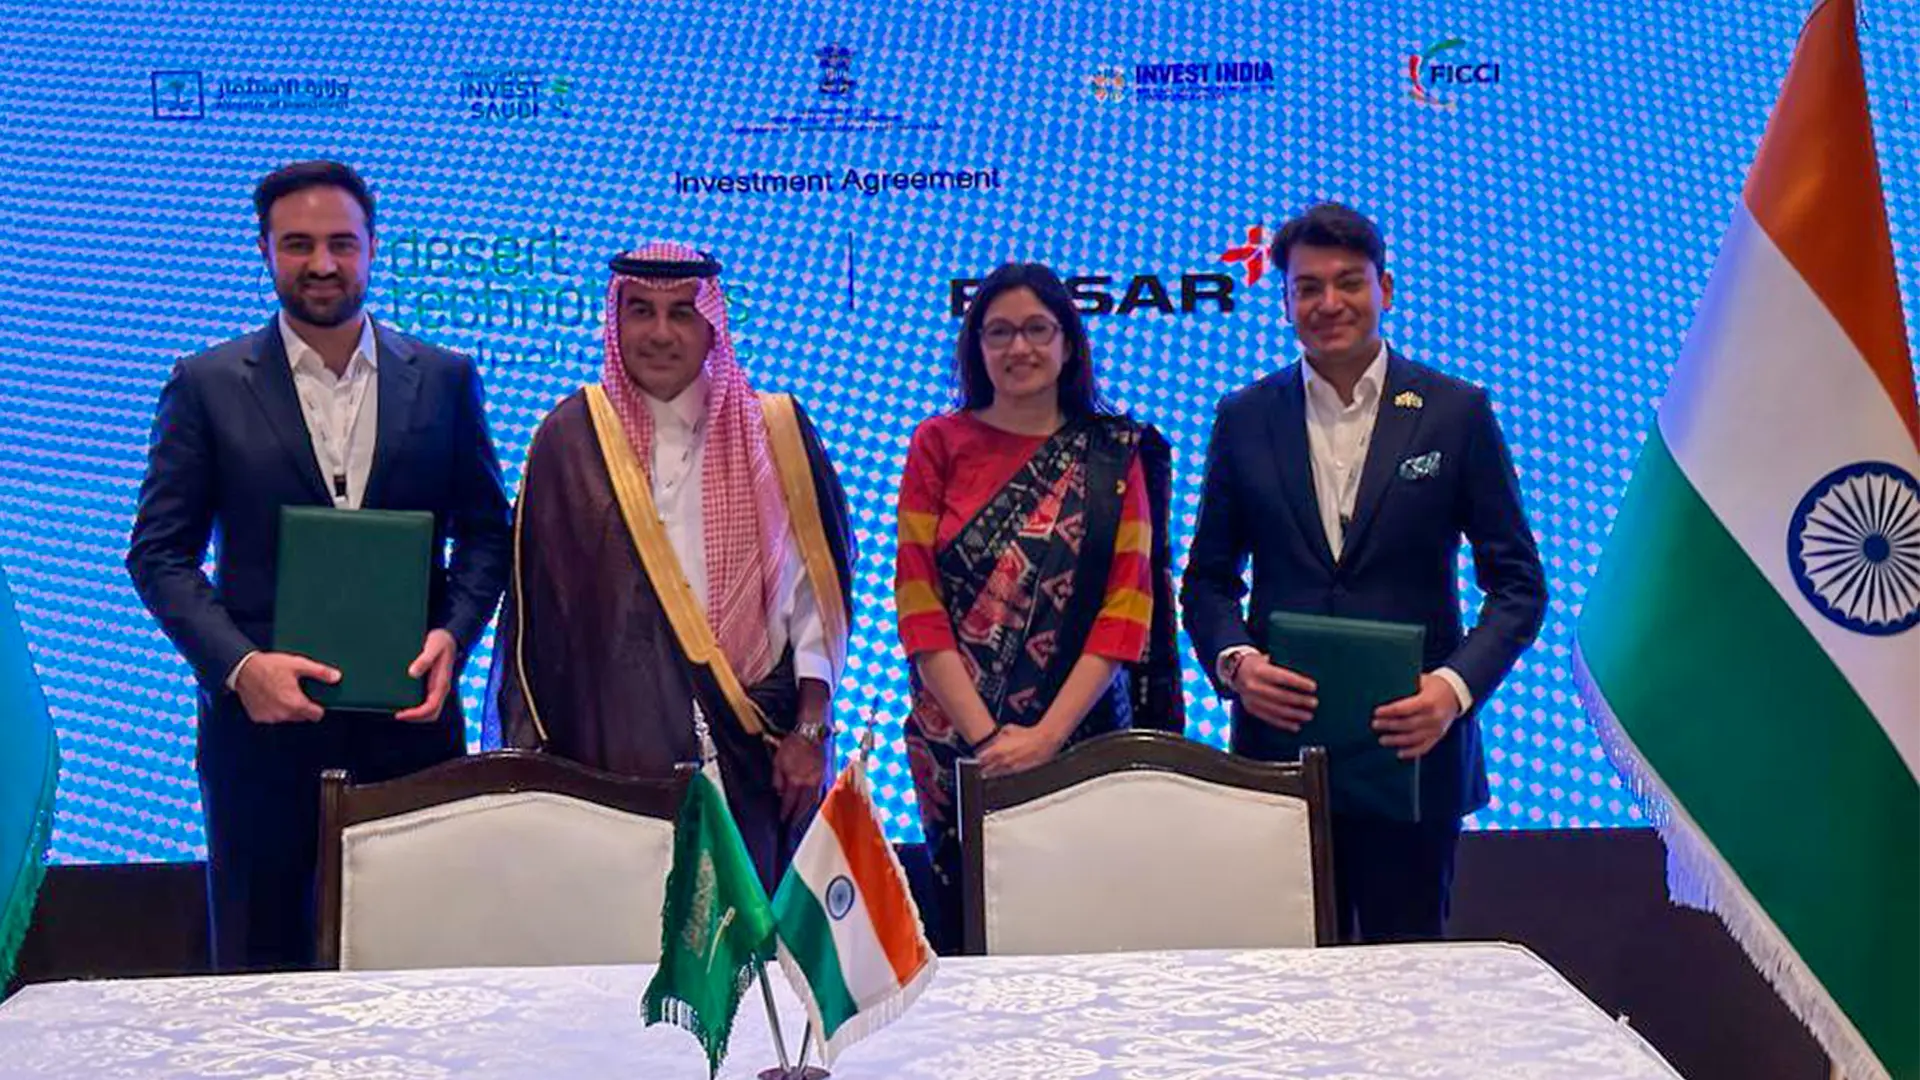 Essar Group and Desert Technologies sign MOU for developing renewable energy solutions for Essar’s KSA Green Steel Arabia Project